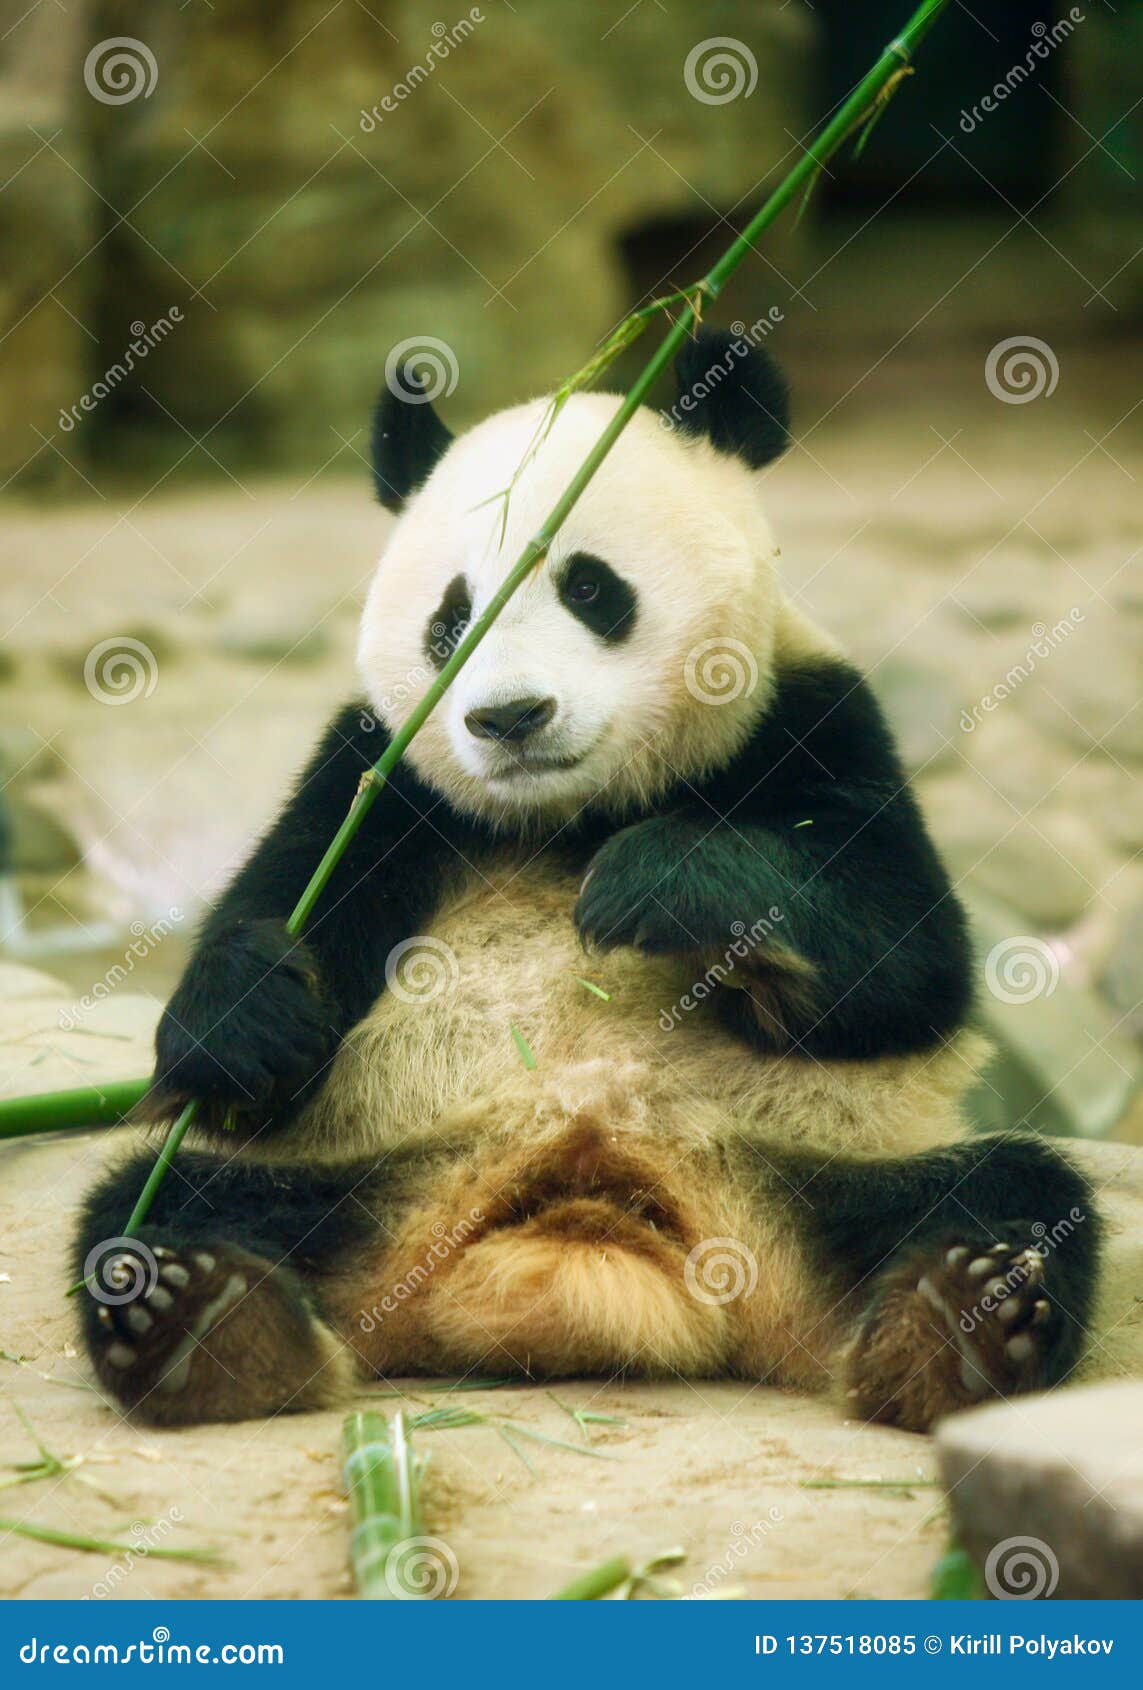 The Giant Panda Sits and Holds a Bamboo Sprig in Its Paws Stock Image -  Image of travel, park: 137518085